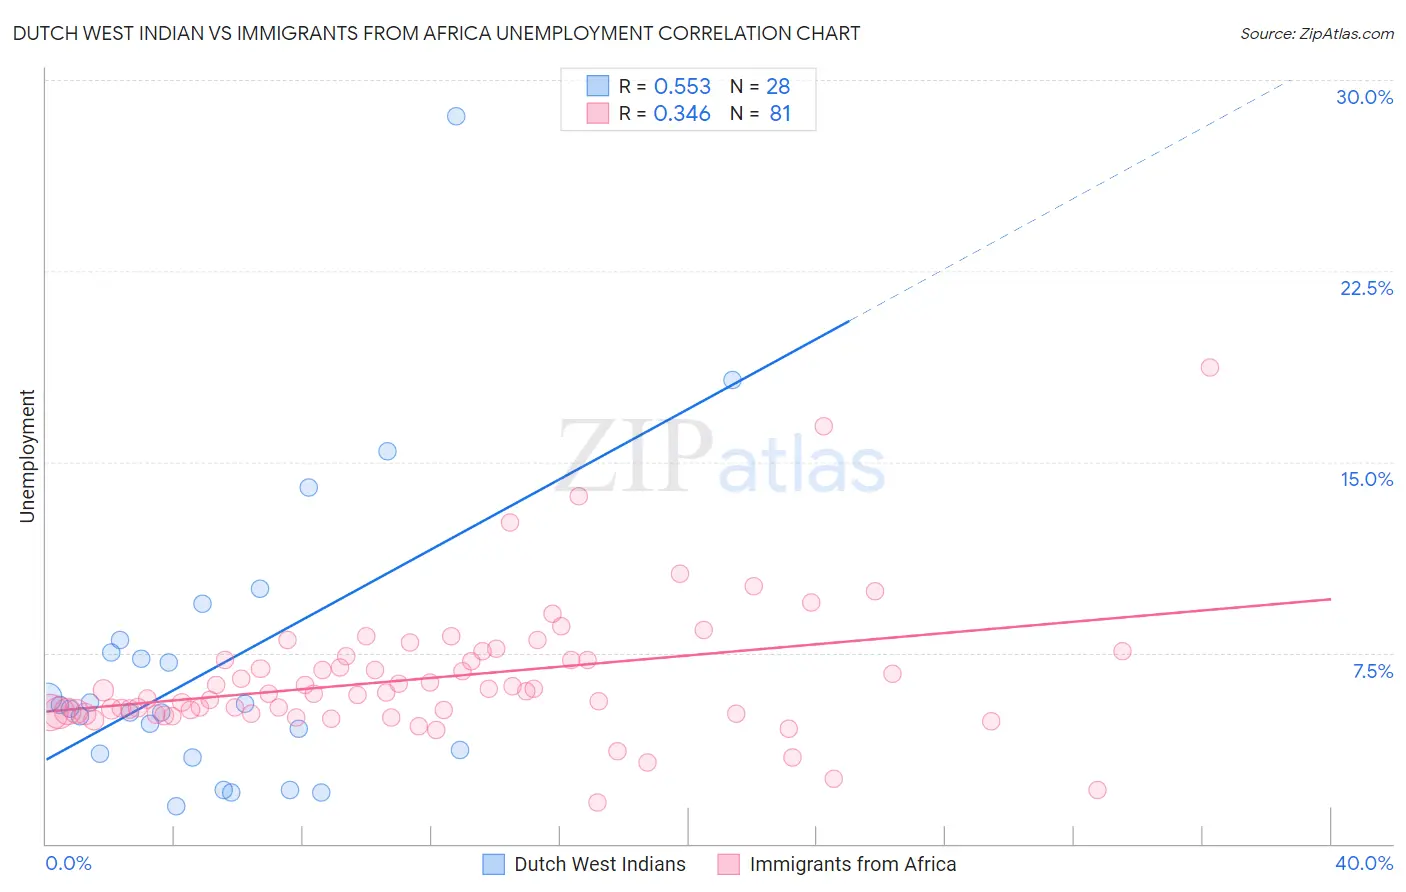 Dutch West Indian vs Immigrants from Africa Unemployment